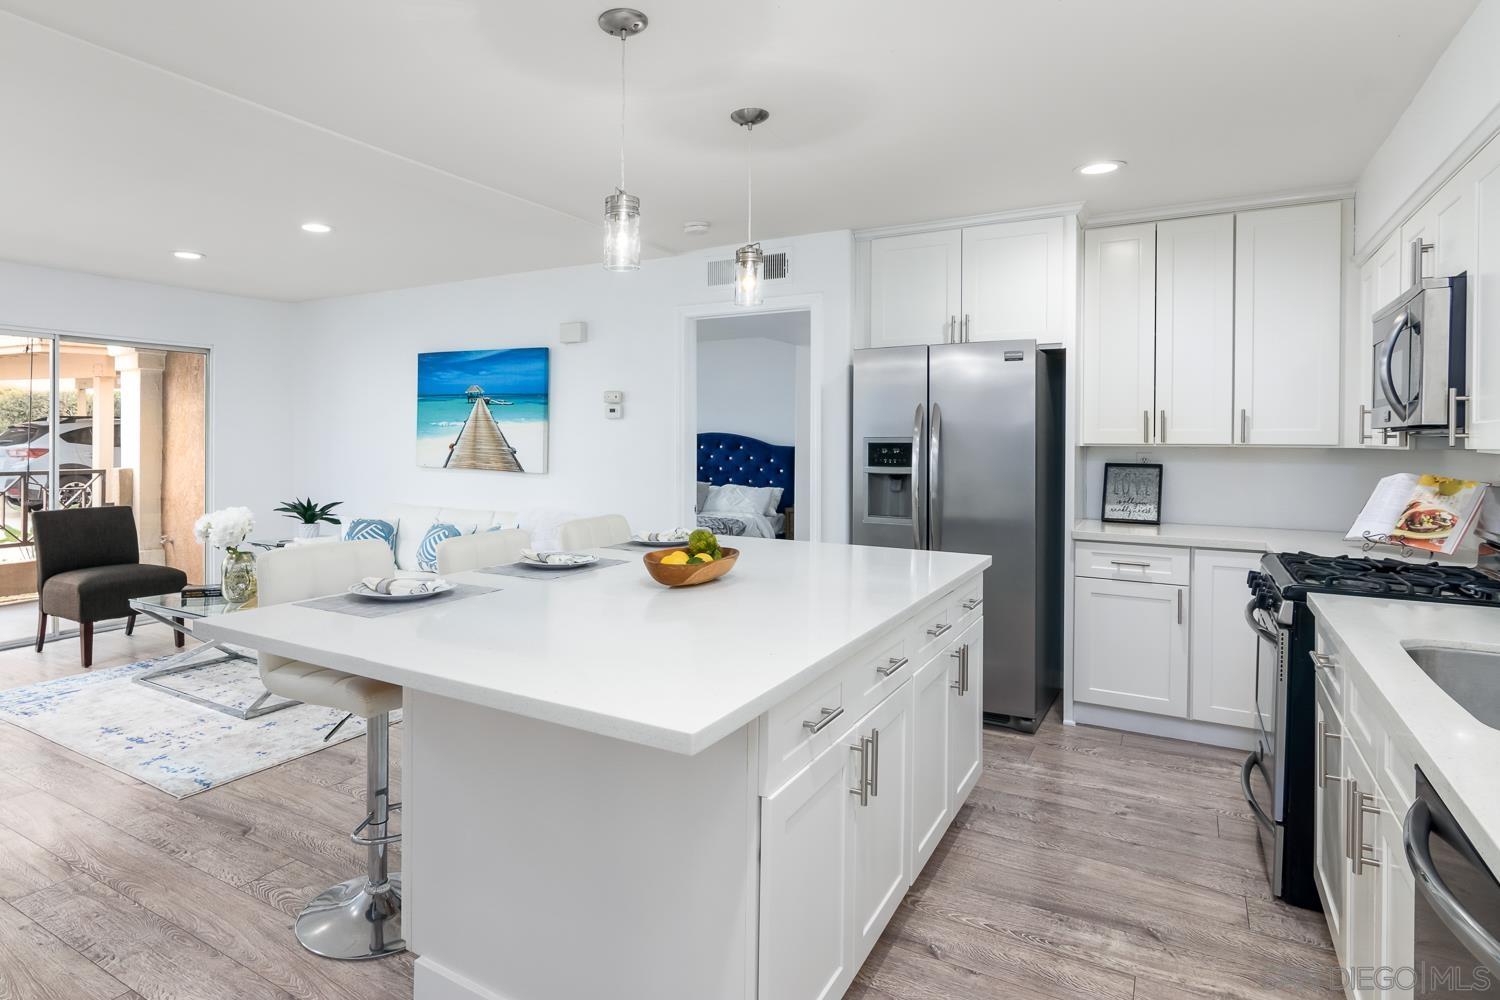 a kitchen with stainless steel appliances kitchen island granite countertop a refrigerator a sink dishwasher a stove with white cabinets and wooden floor